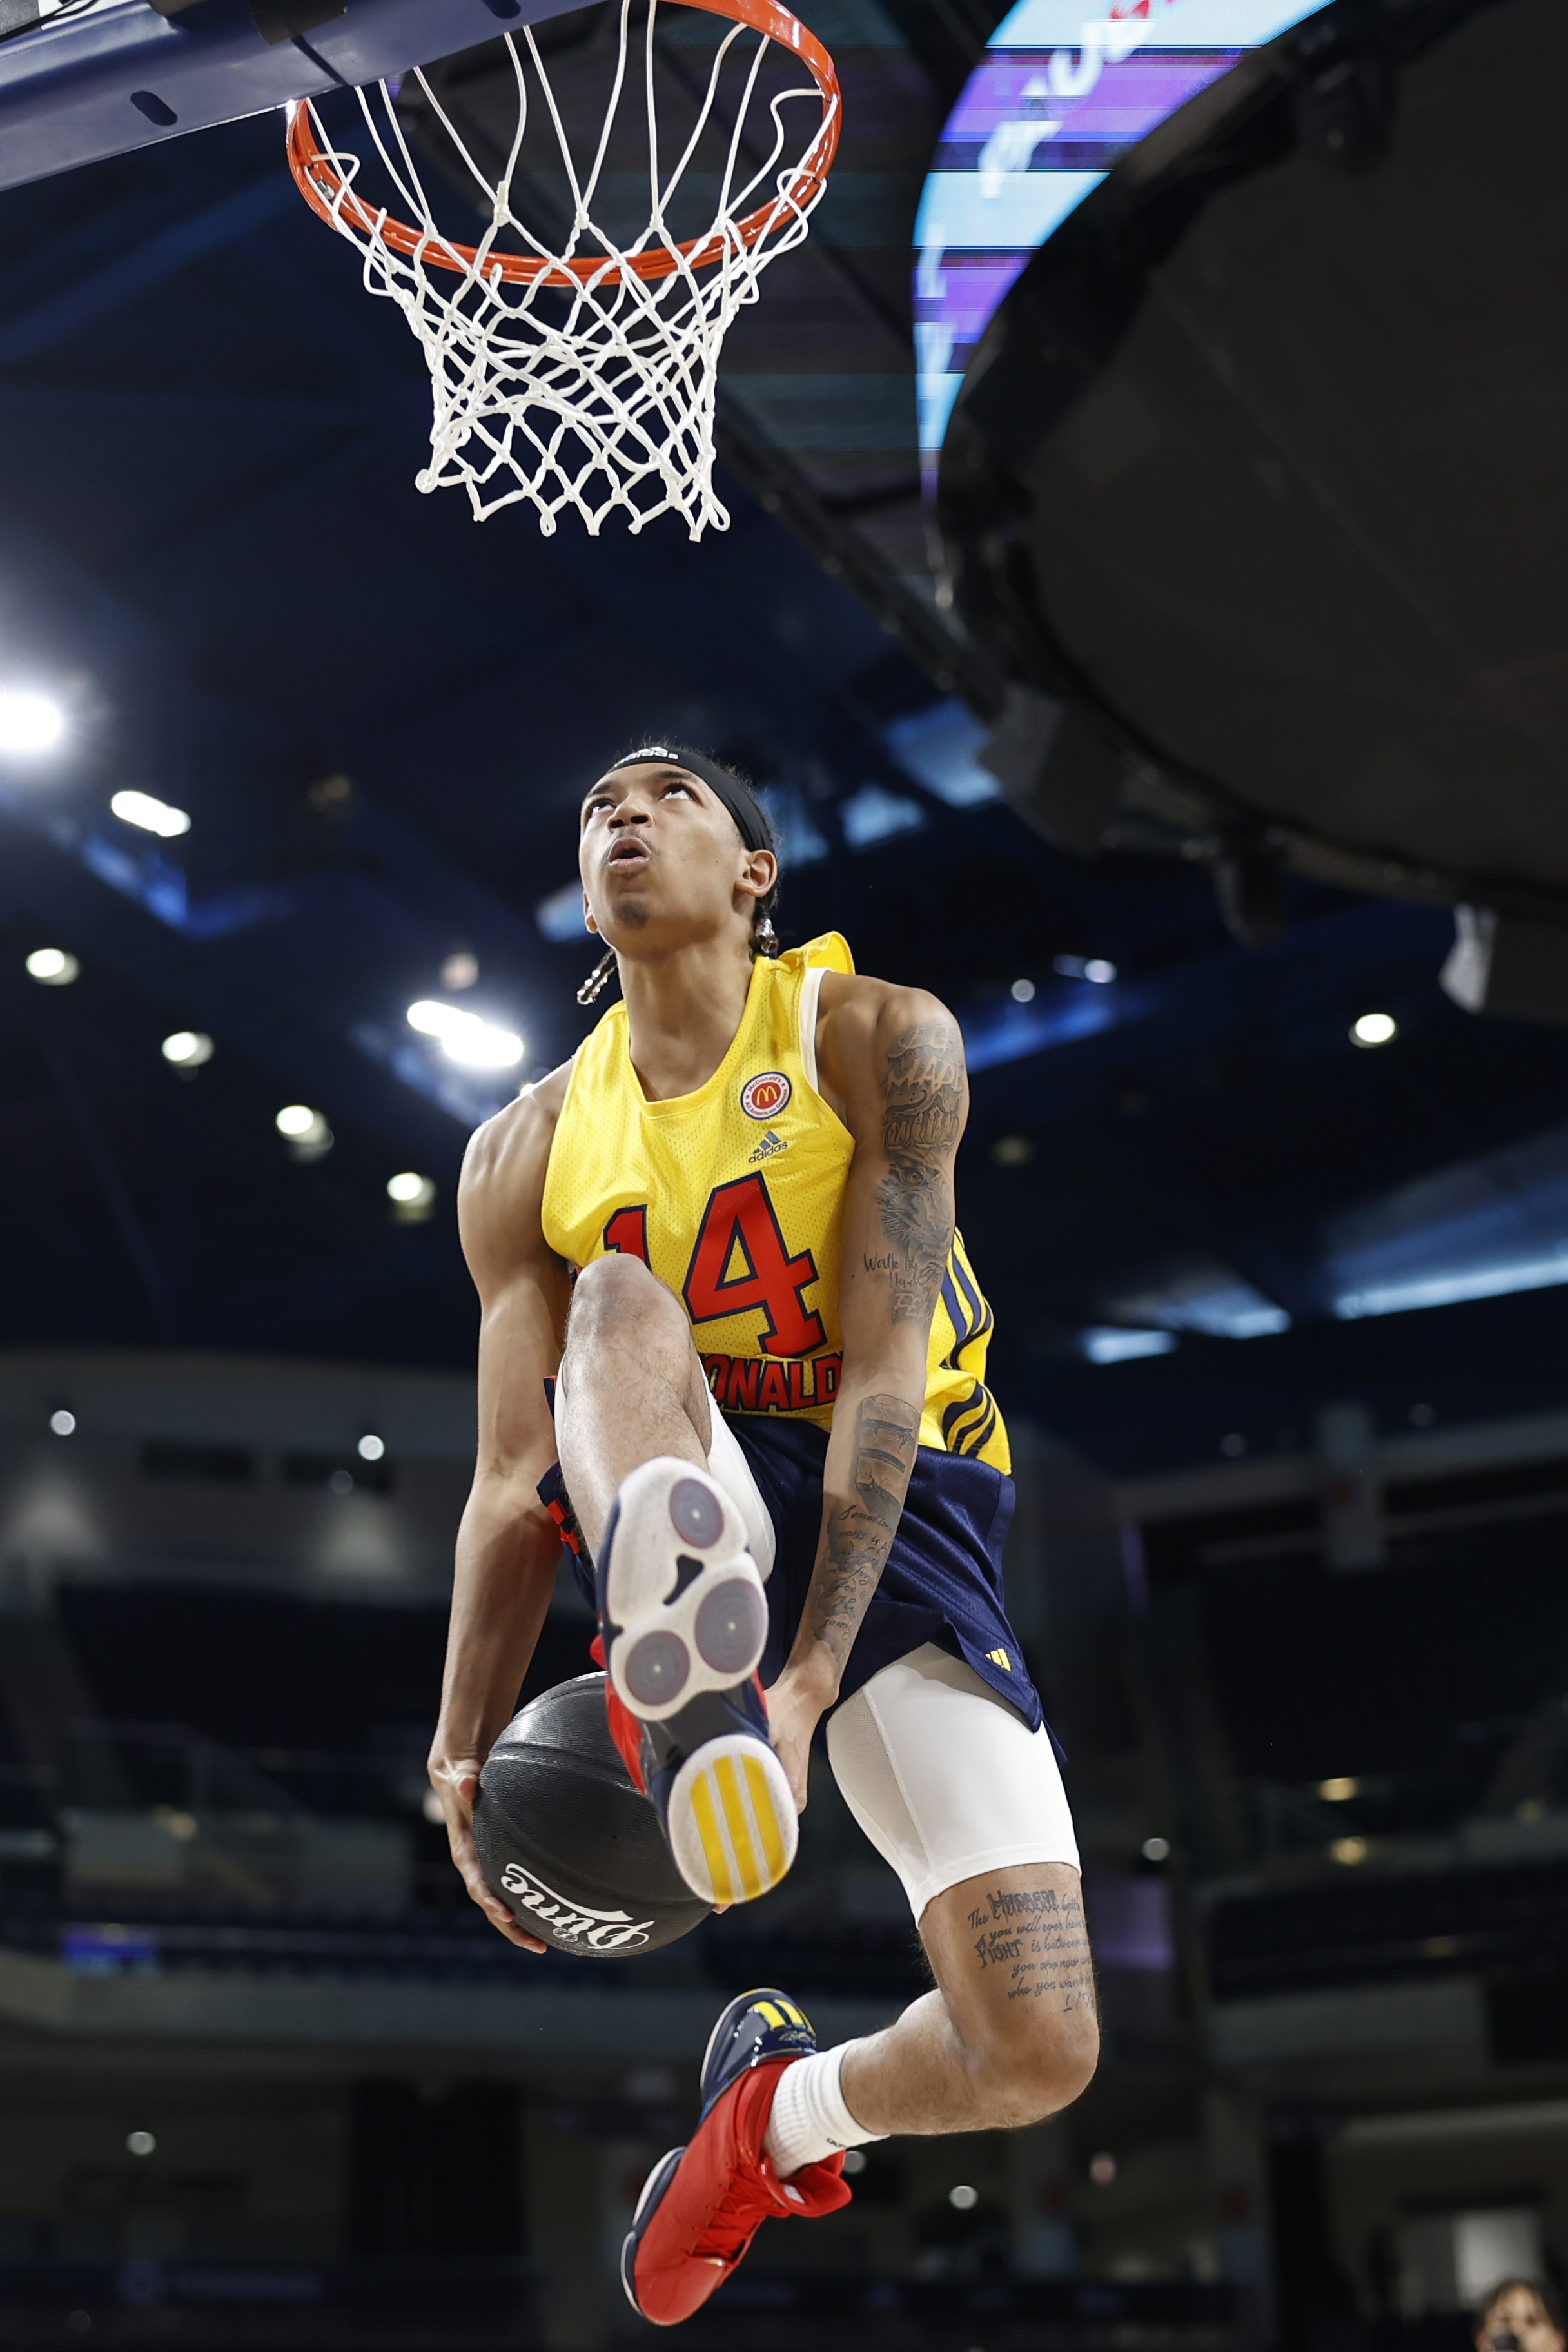 CHICAGO, IL - MARCH 28: McDonalds High School All American Nick Smith Jr. dunks on March 28, 2022 during the Powerade Jam Fest at the Wintrust Arena. Photo by Brian Spurlock/Icon Sportswire)